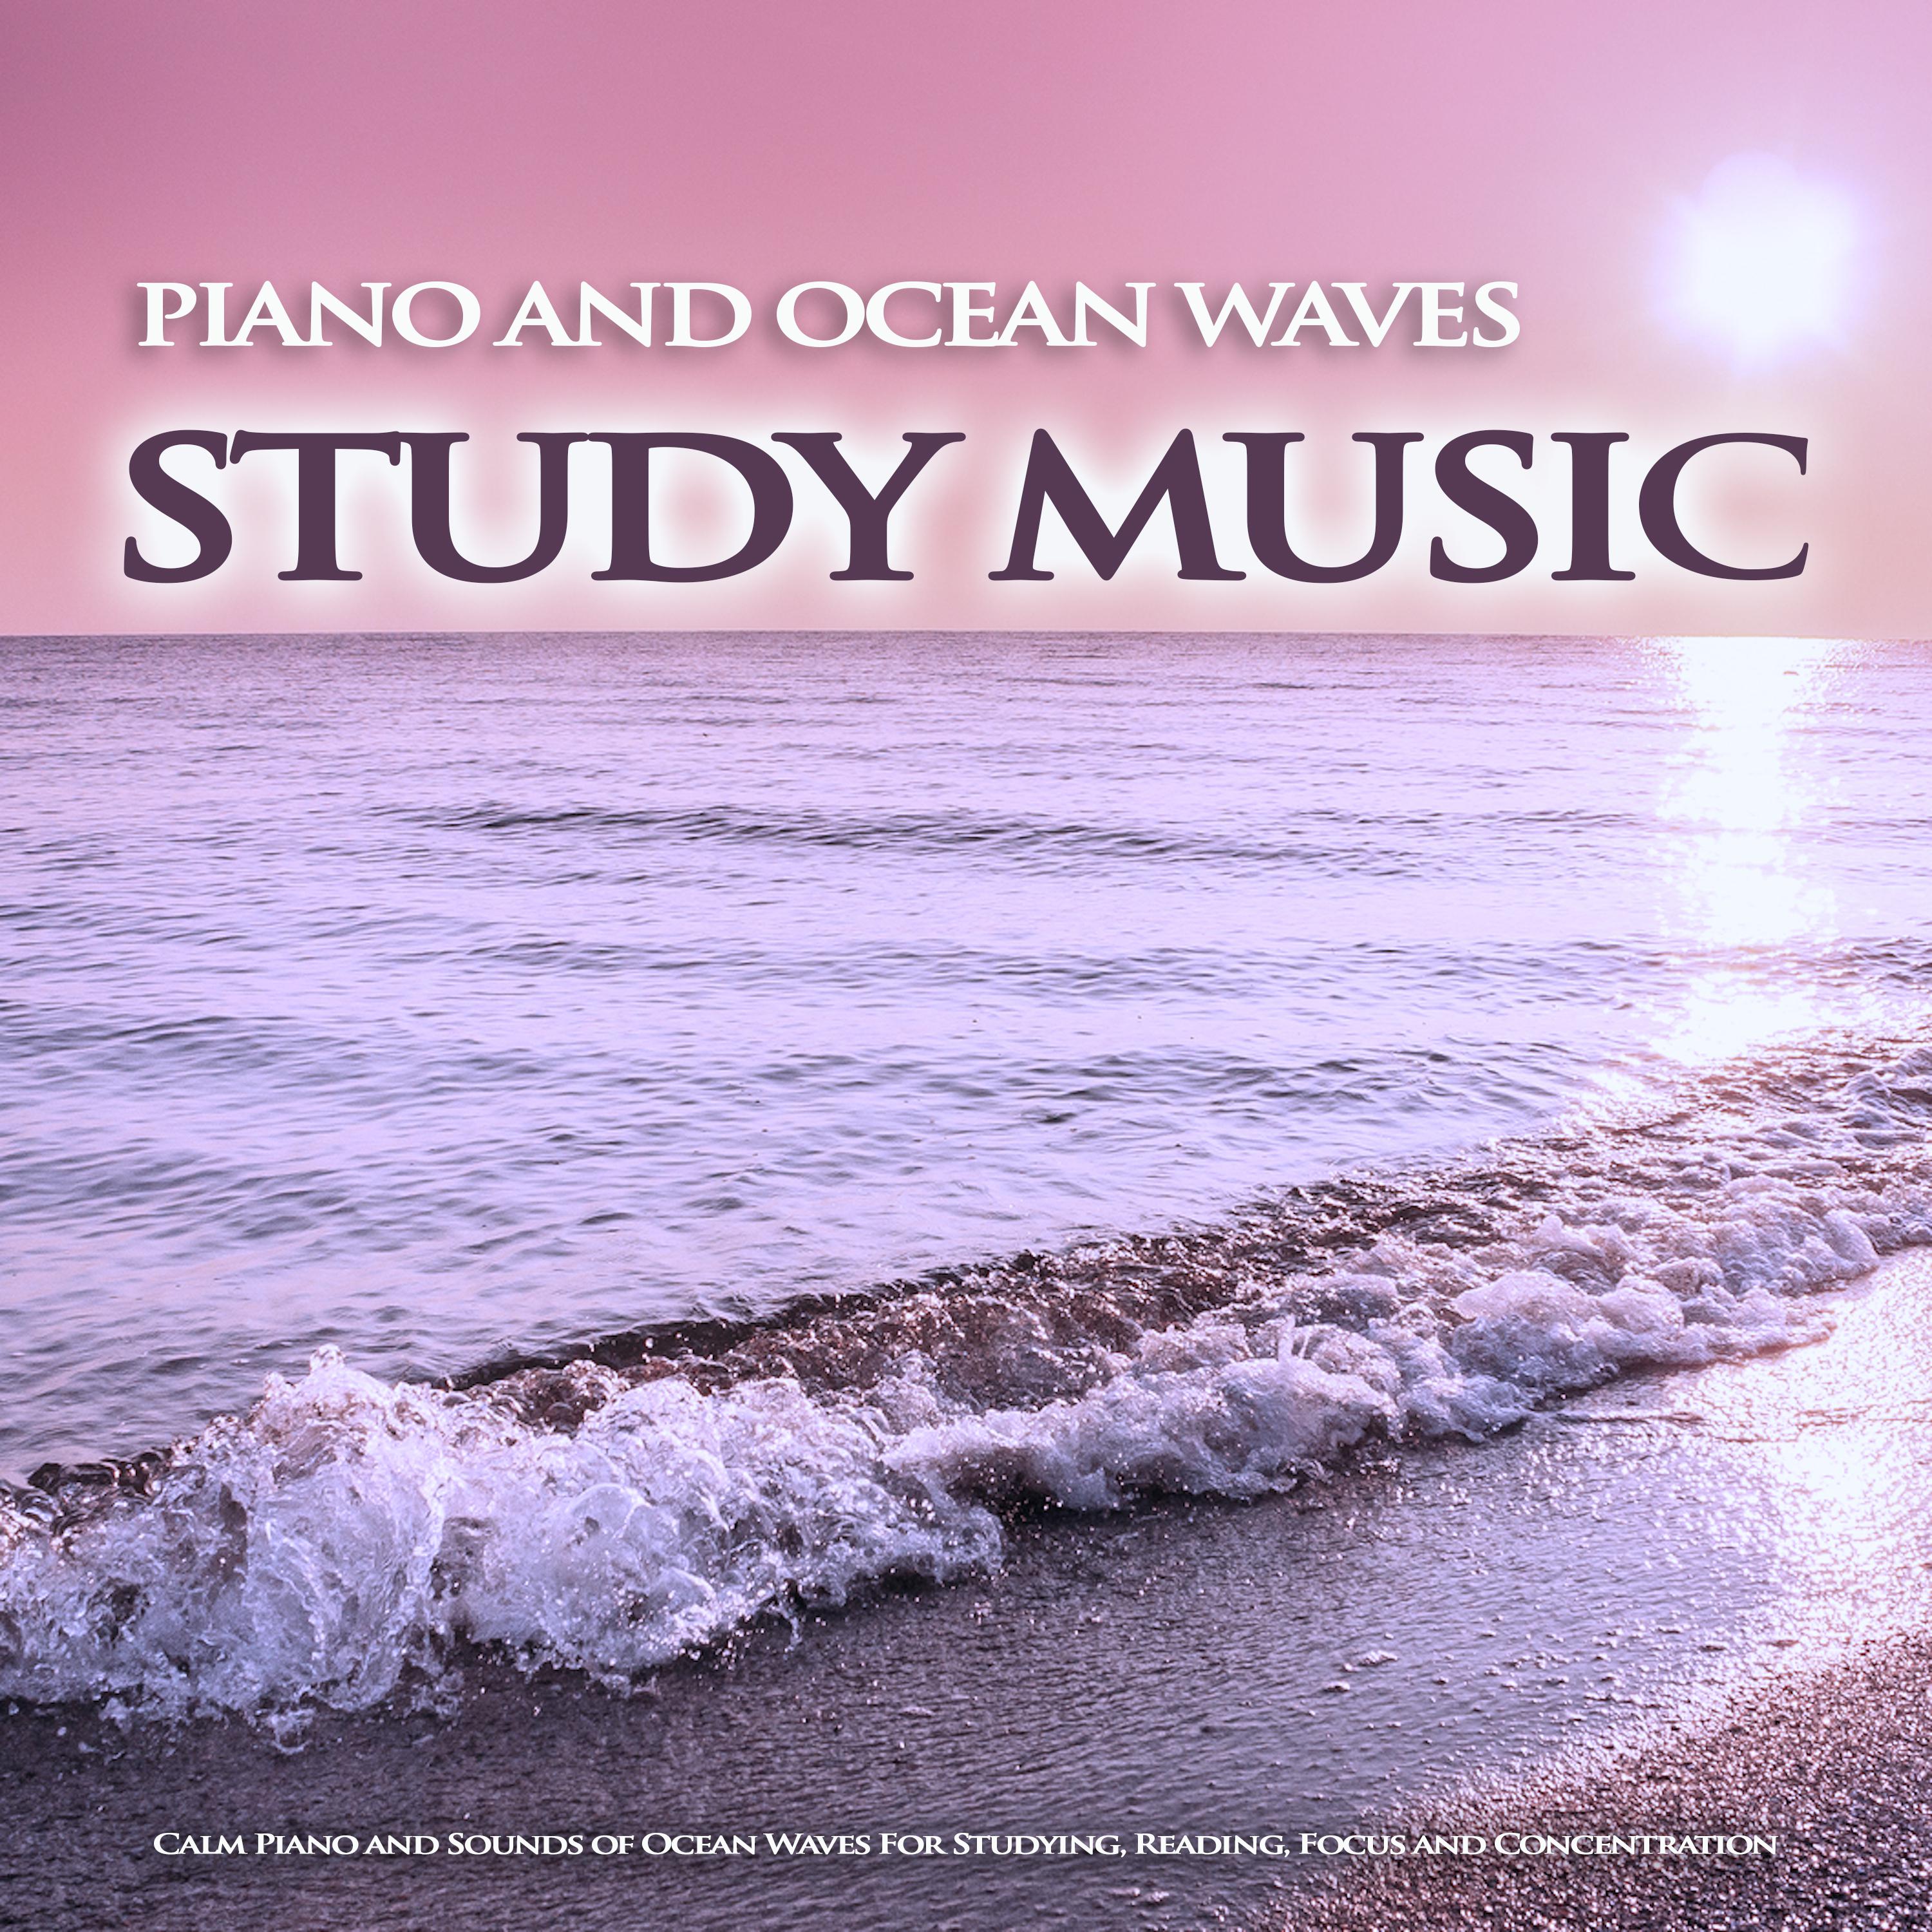 Sounds of the Ocean Study Music